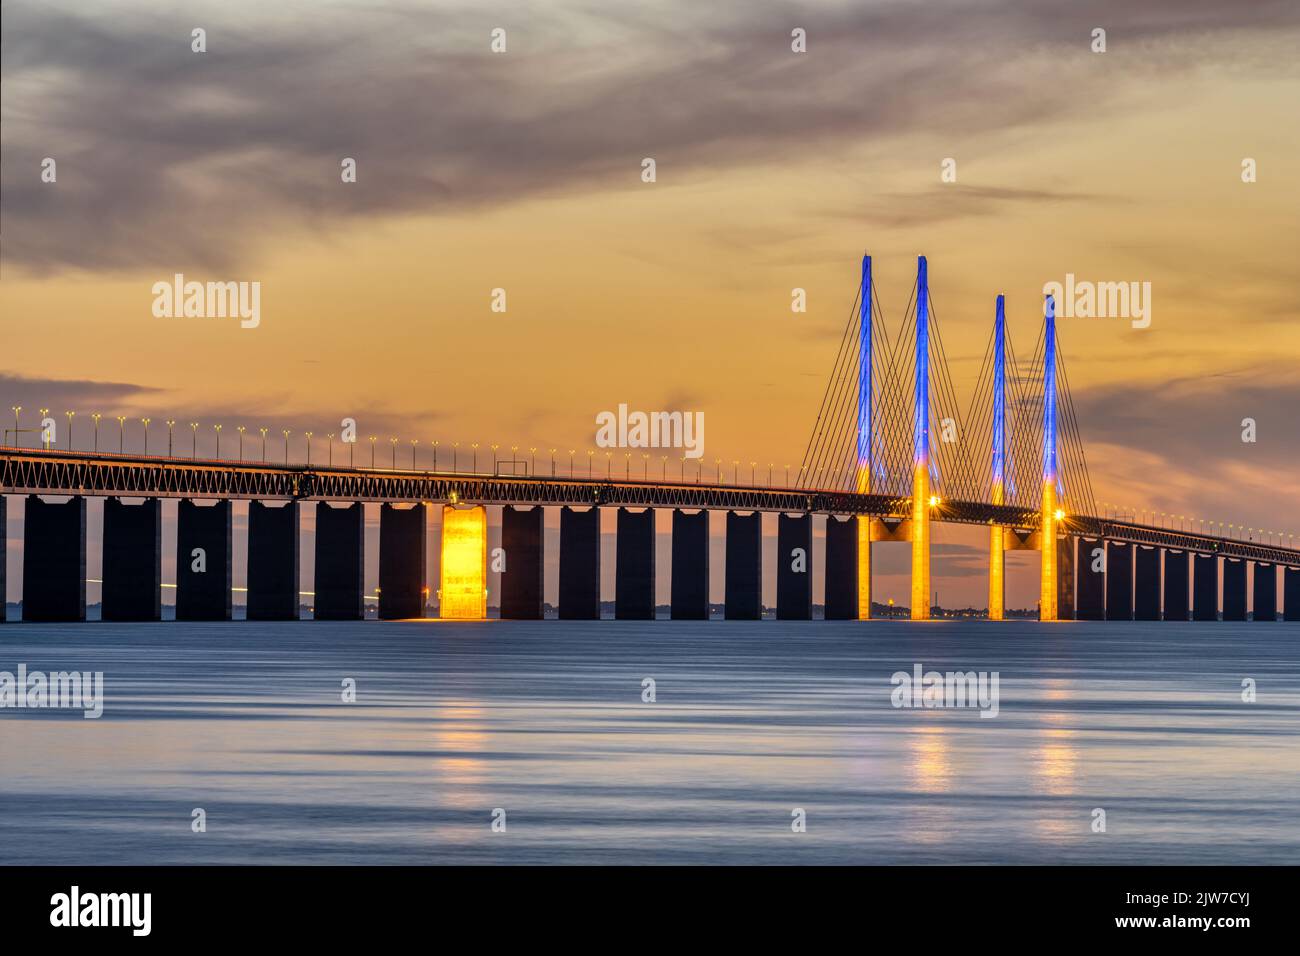 The famous Oresund bridge between Denmark and Sweden after sunset Stock Photo